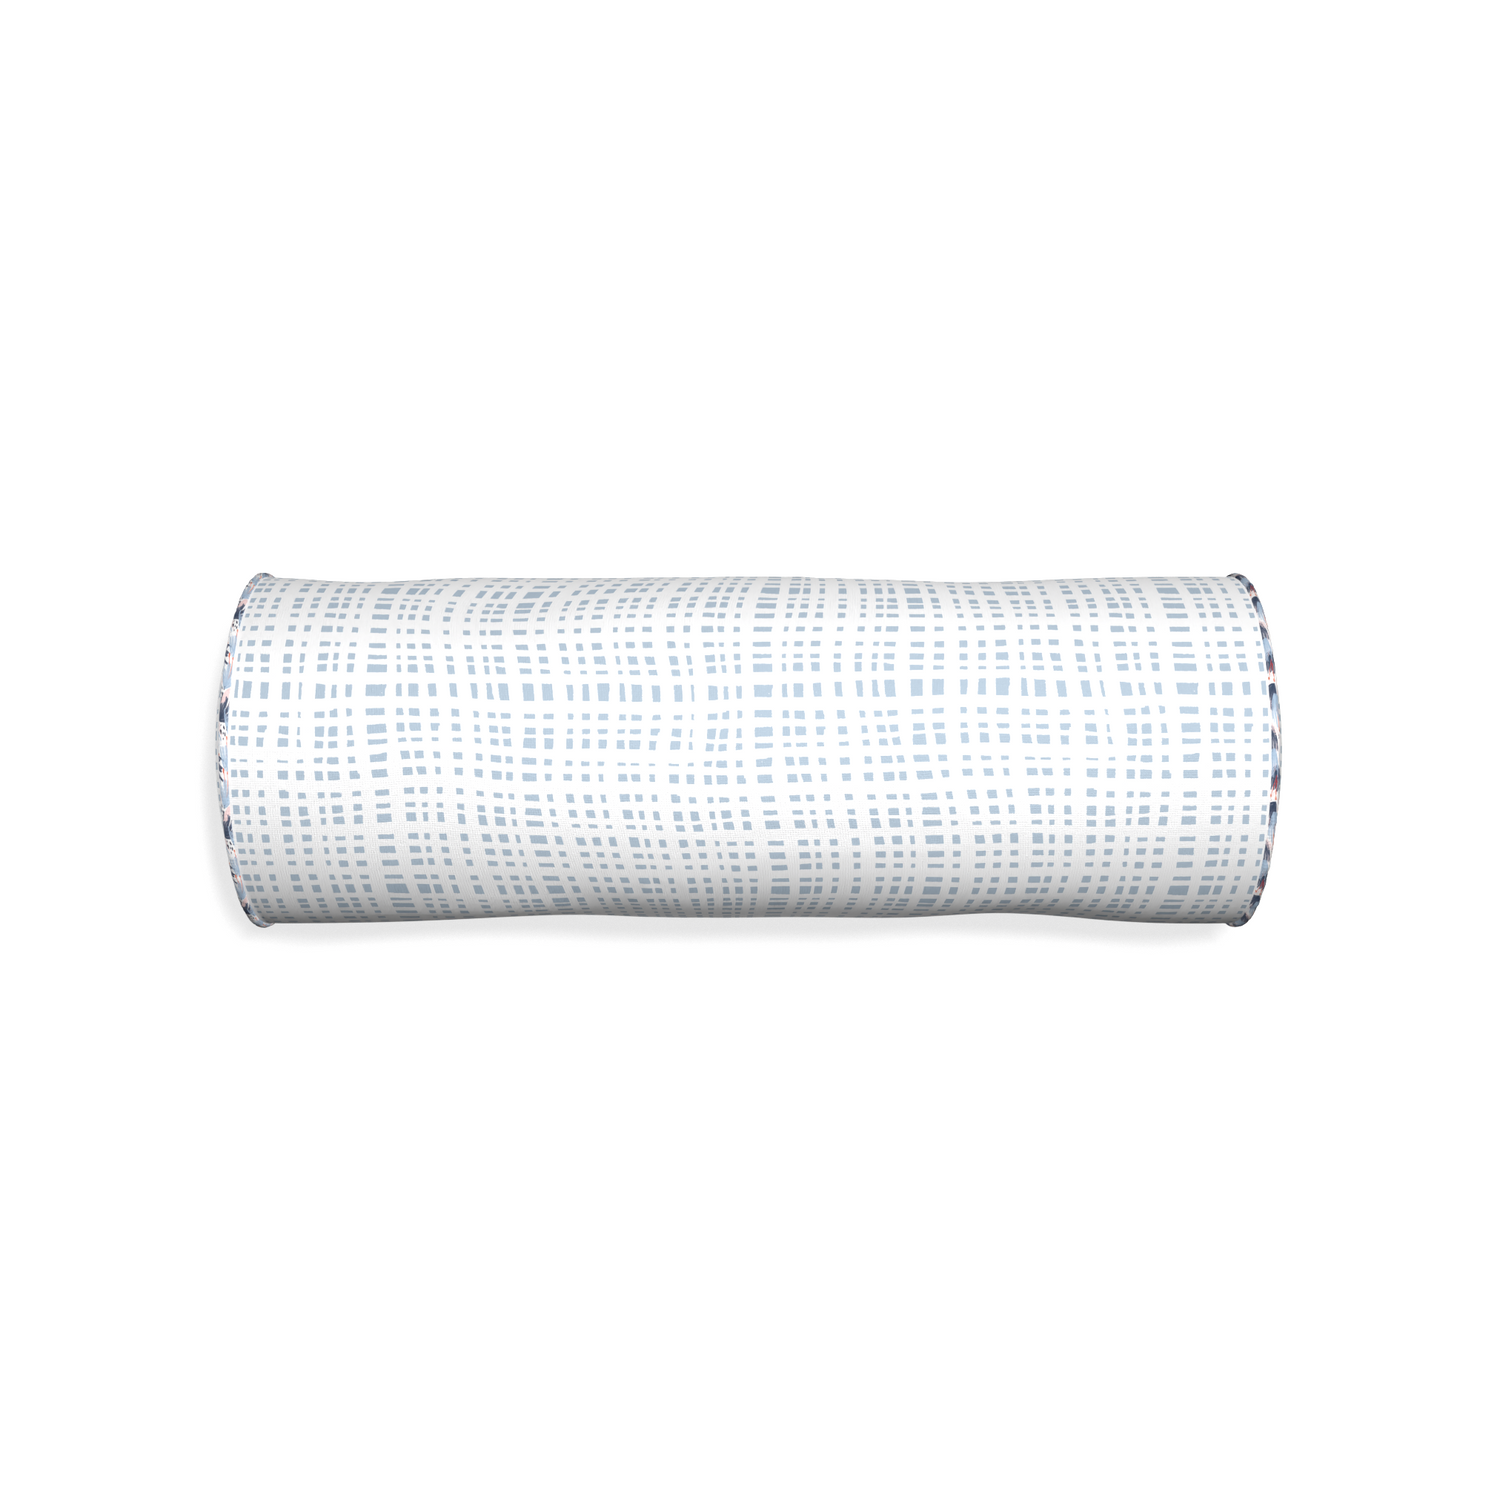 Bolster ginger custom plaid sky bluepillow with e piping on white background